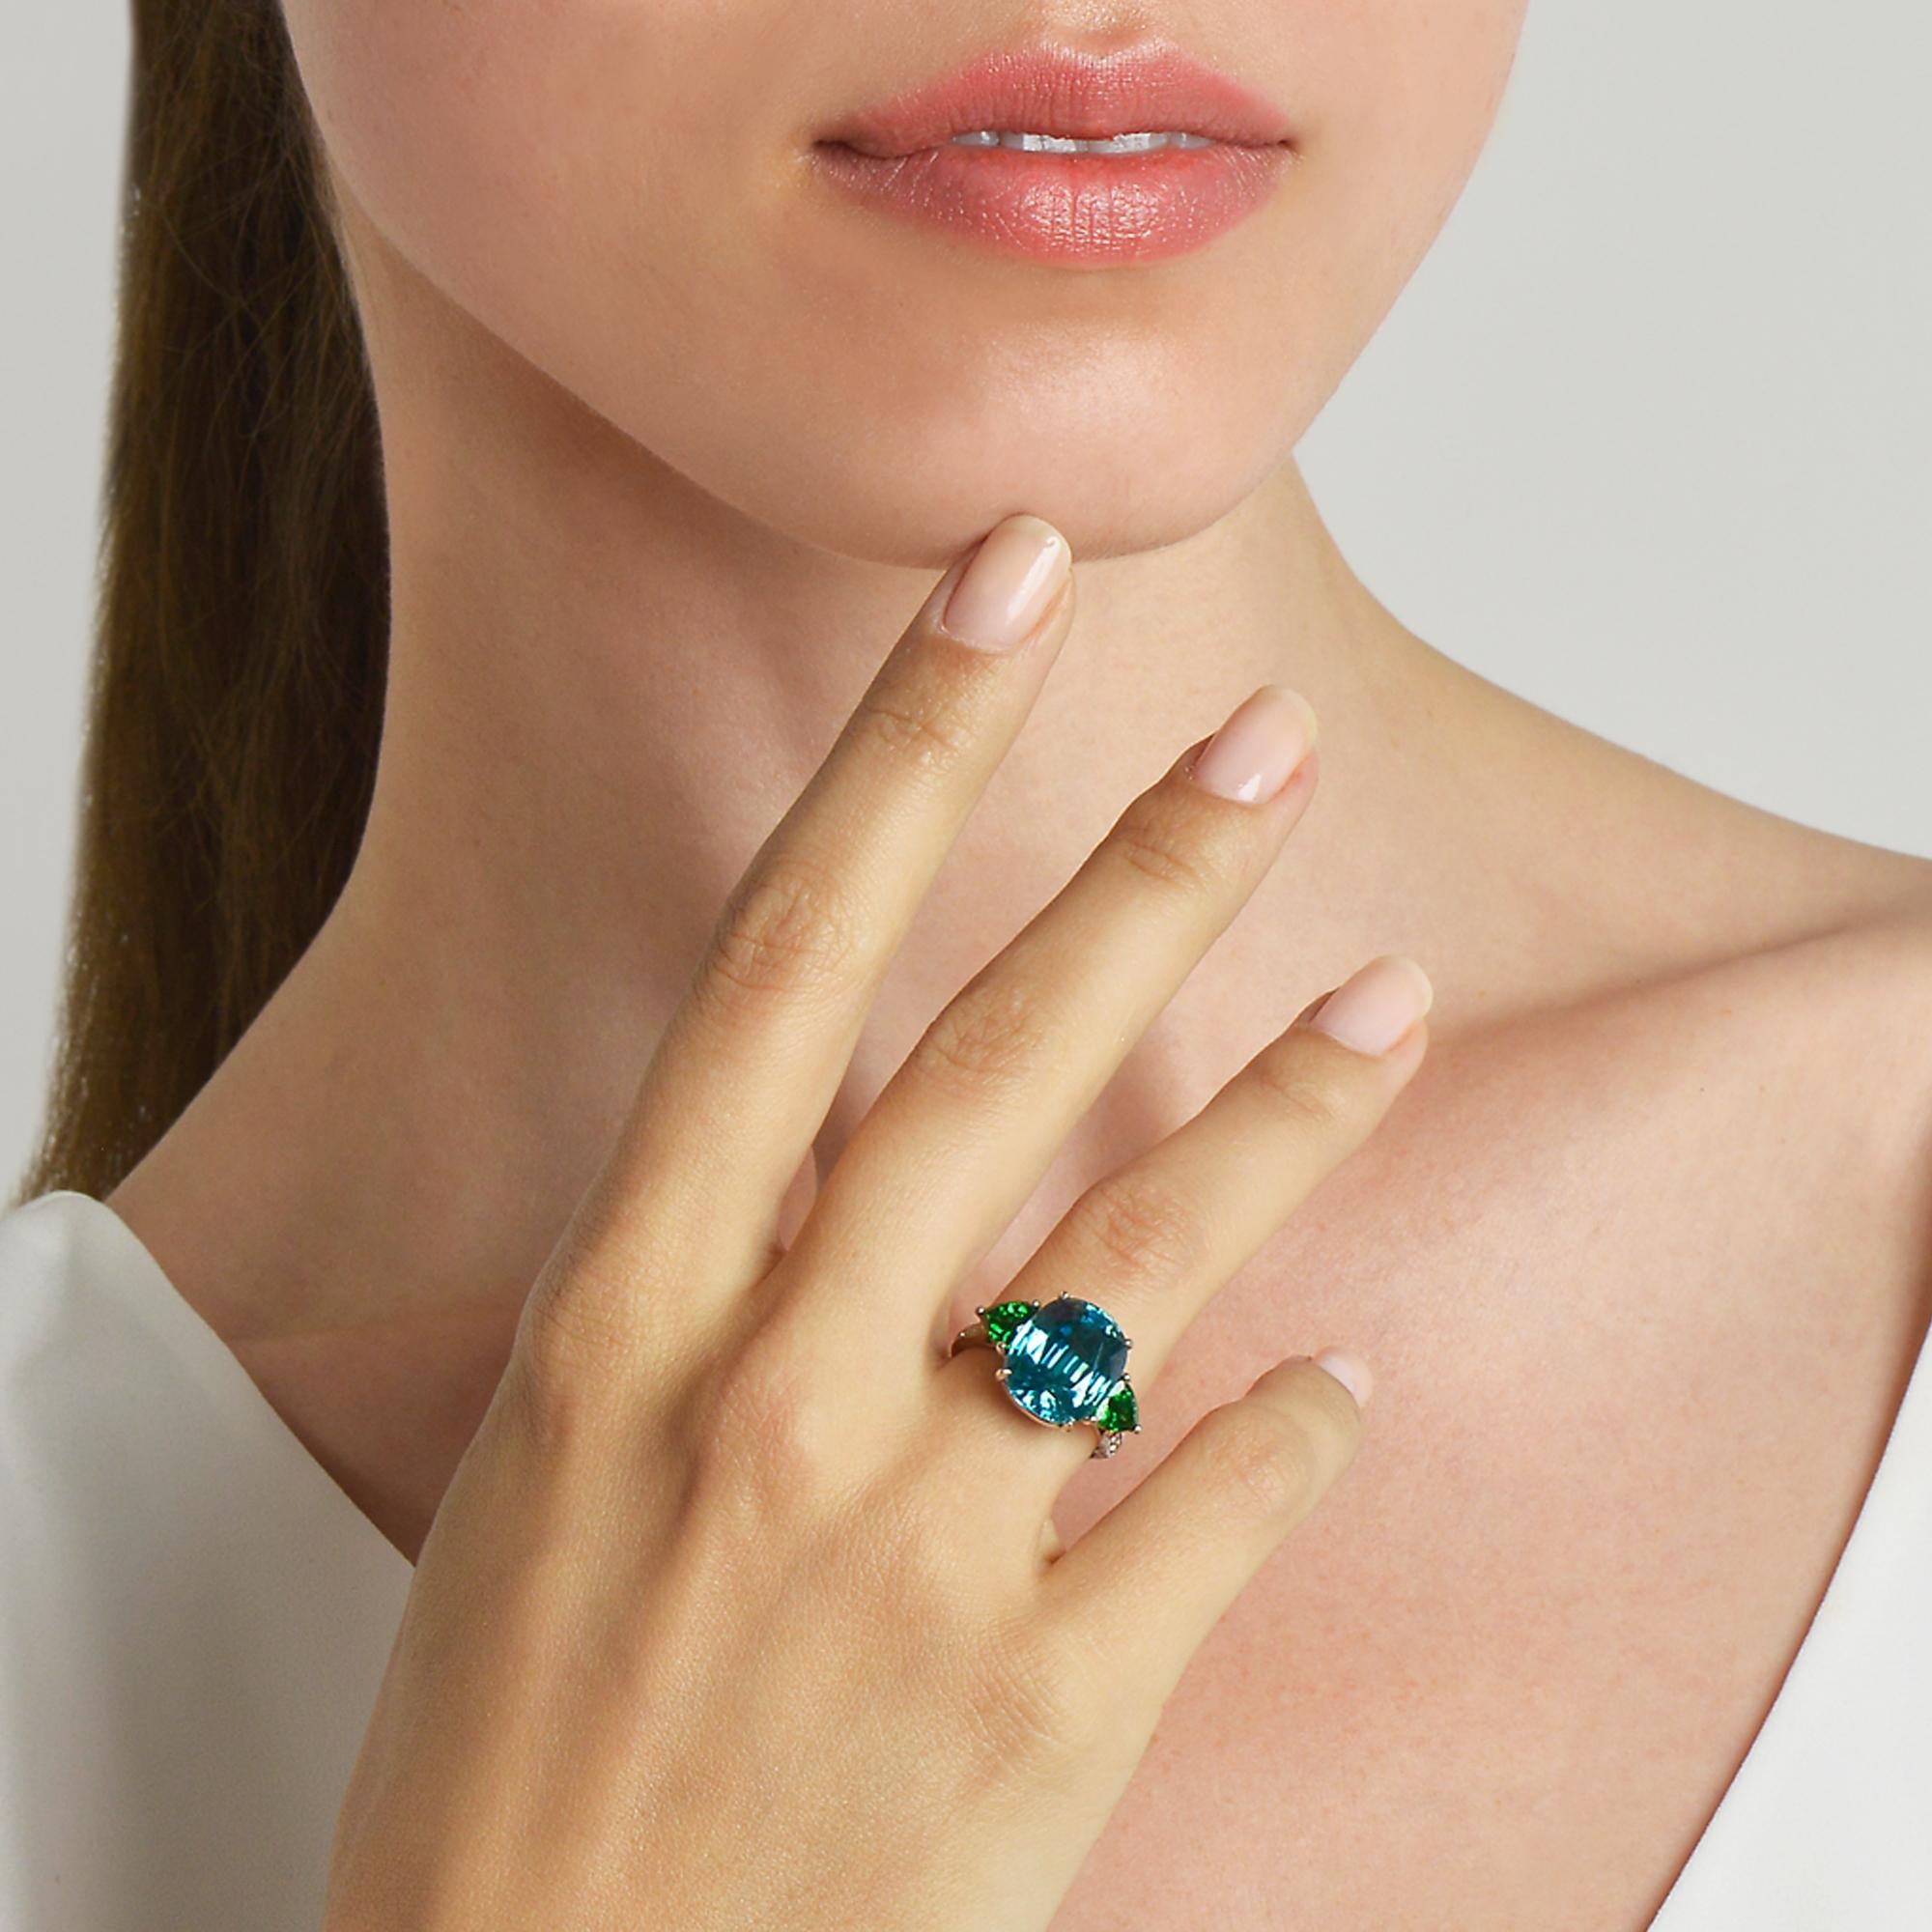 18 karat white gold three-stone ring set with an oval blue zircon flanked by two trillion-cut green tourmalines with diamond detail. 

Each Paolo Costagli contemporary engagement ring is a one of a kind, handcrafted testament to your love story.